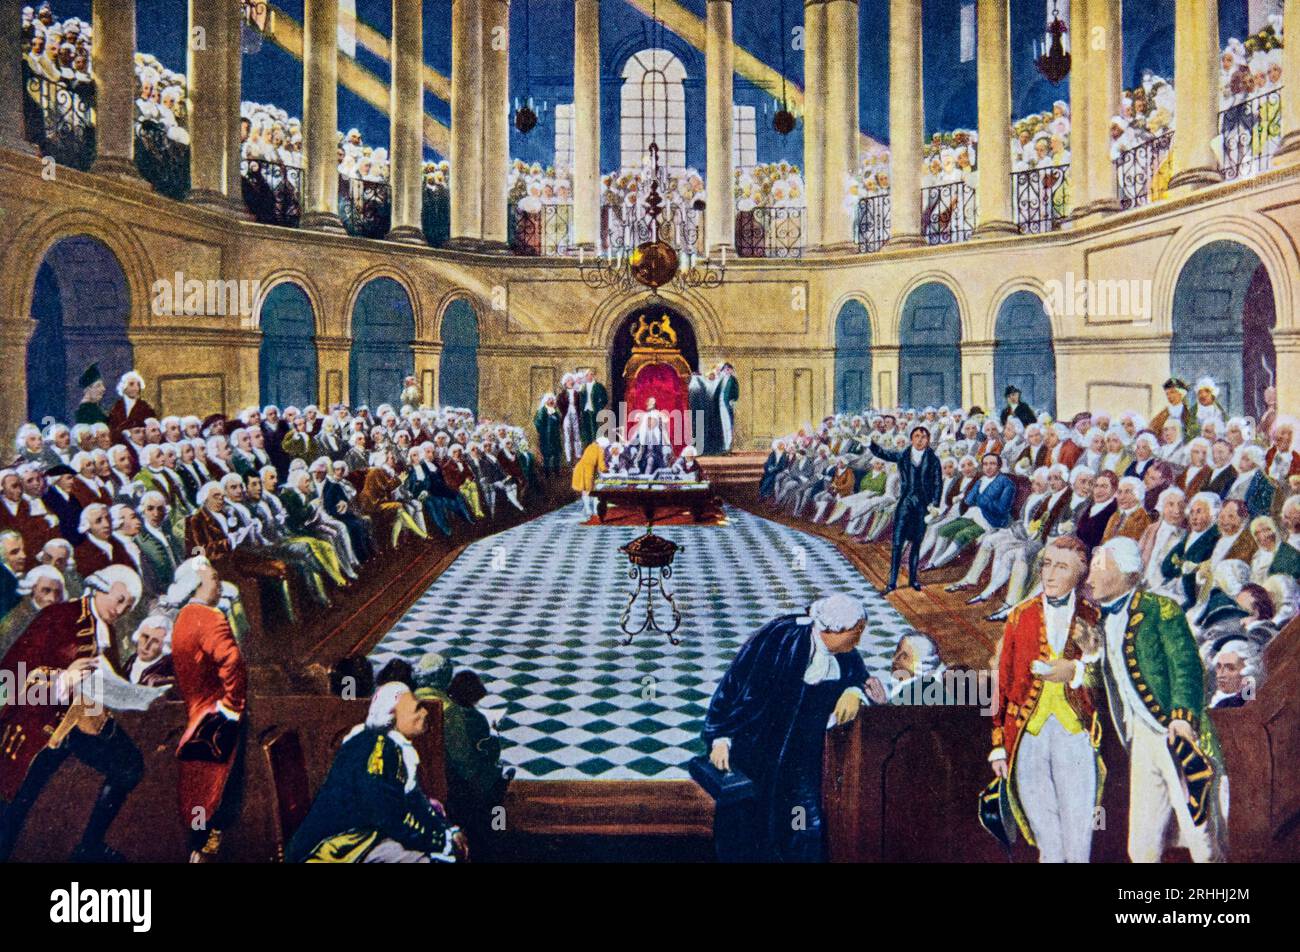 A meeting of the House of Commons in the Parliament of Ireland, modelled on the English Parliament. It comprised of two chambers, the House of Commons and the House of Lords. The Commons was directly elected, albeit on a very restricted franchise. Parliaments met at various places until circa 1730, when the purpose-built Parliament House on College Green came into being. The Acts of Union 1800 merged the Kingdom of Ireland and Kingdom of Great Britain into the United Kingdom of Great Britain and Ireland and the parliament was merged with that of Great Britain. Stock Photo